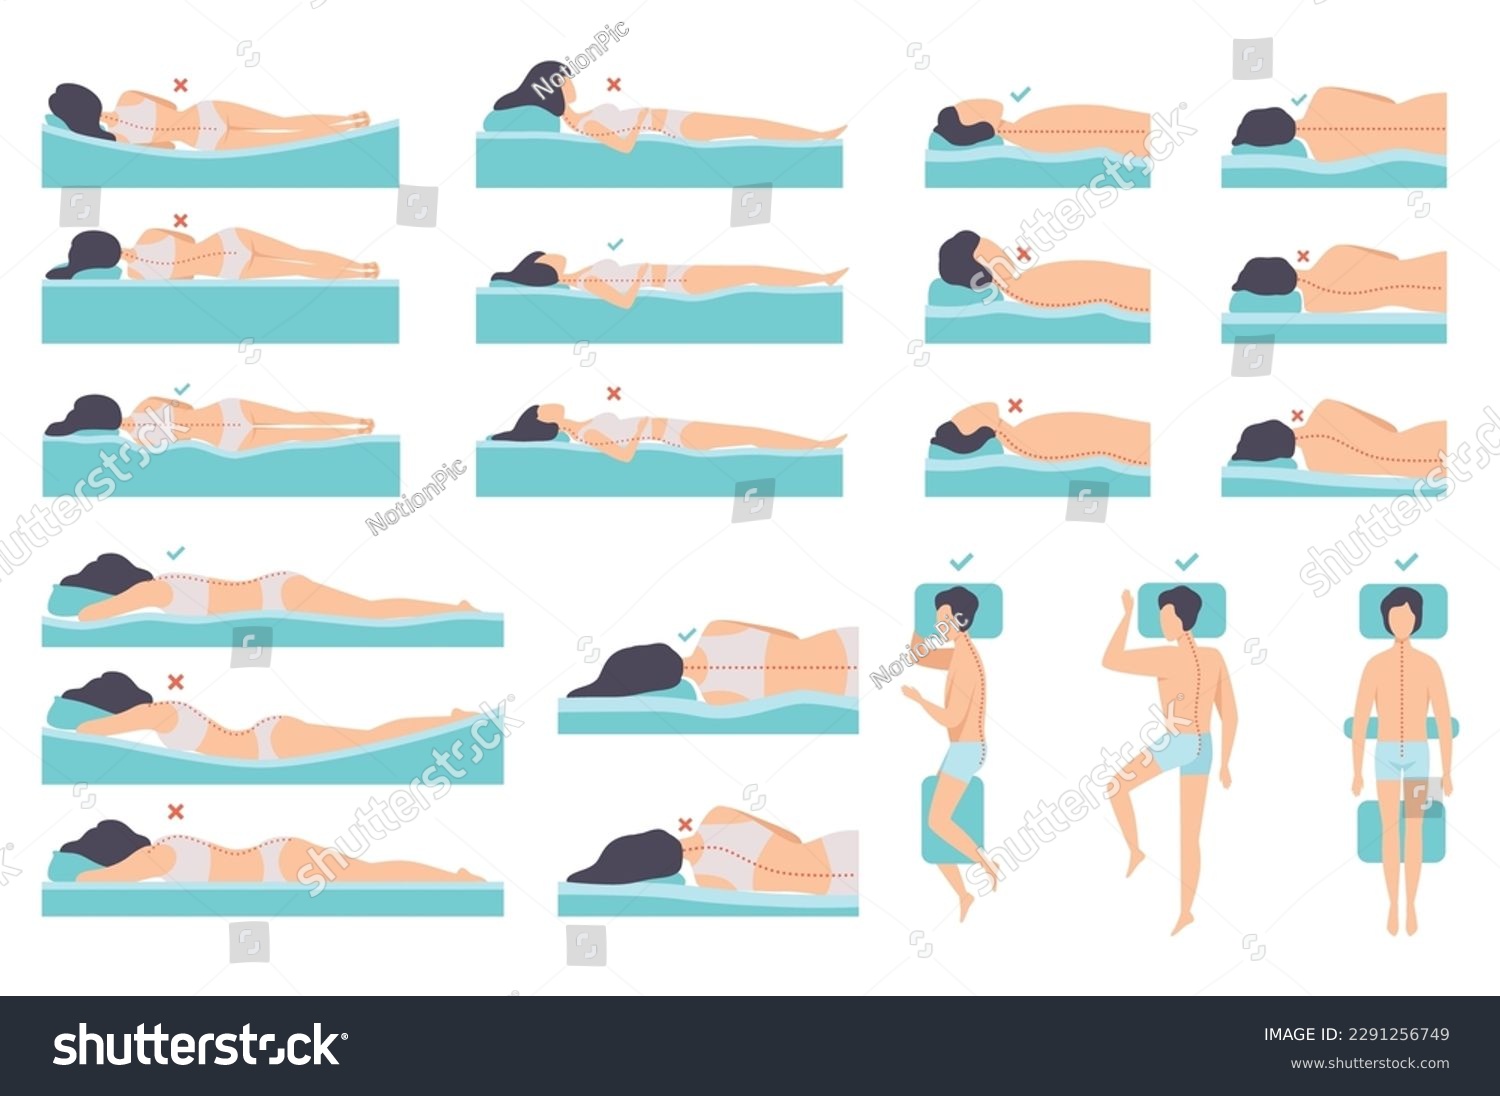 Correct and incorrect posture of spine during sleep set. Men and women sleeping in different poses cartoon vector #2291256749